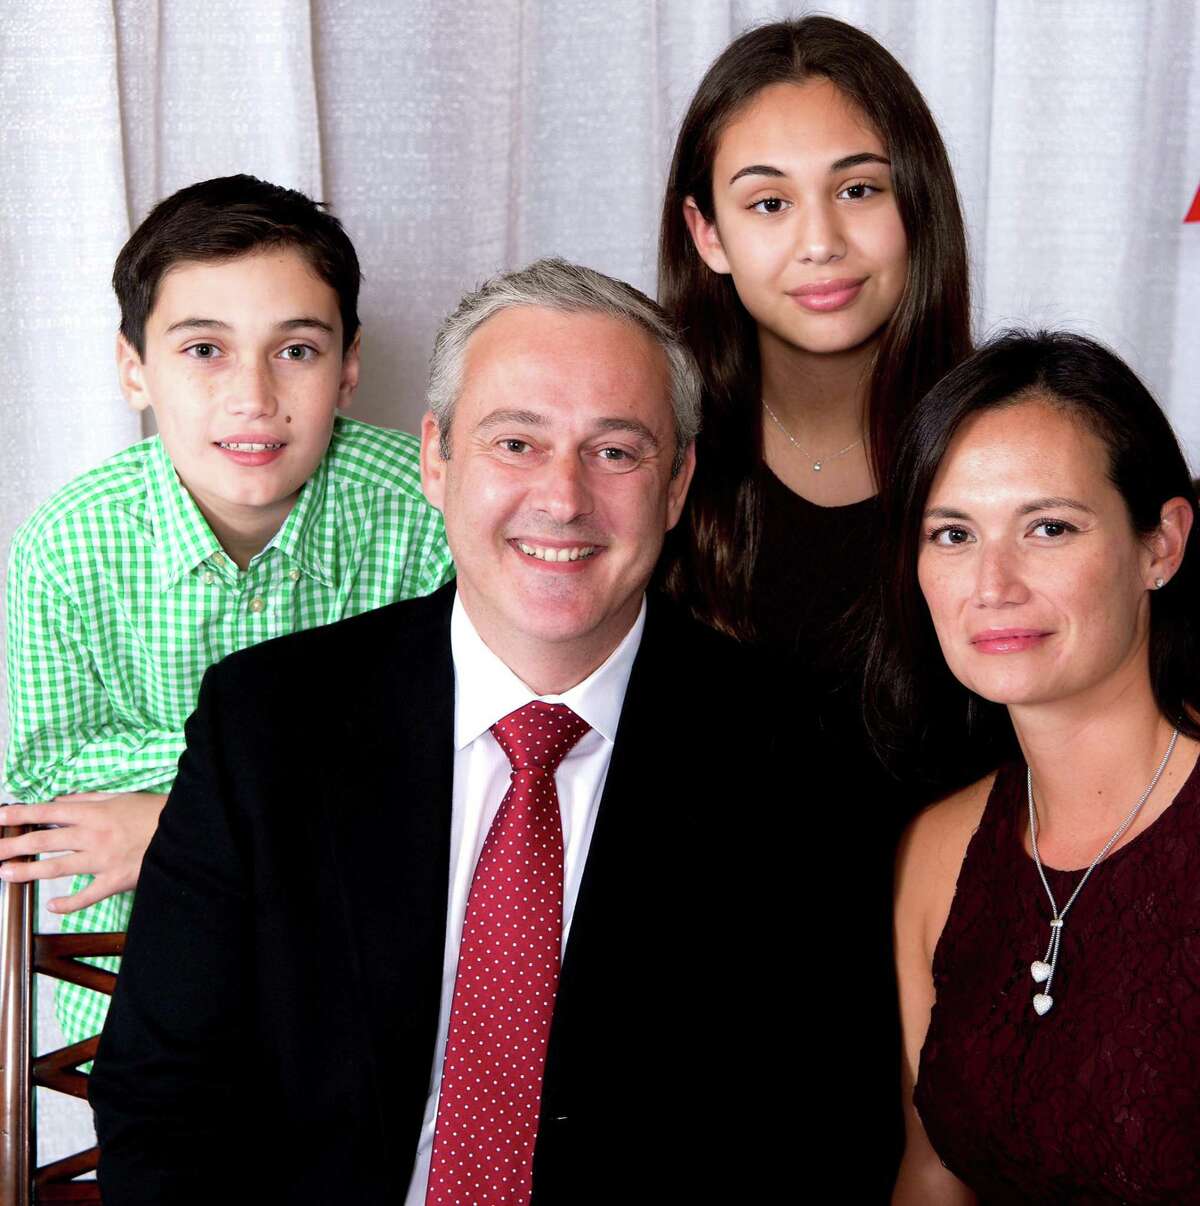 John Kydes pictured here with his wife, Naomi, daughter, Sophia, 16, and son, John, 14. Kydes, a Democrat in his fourth term on the Common Council in Norwalk, Conn., announced on Dec. 8, 2020 he’s launching an exploratory committee to look into a potential run for mayor.